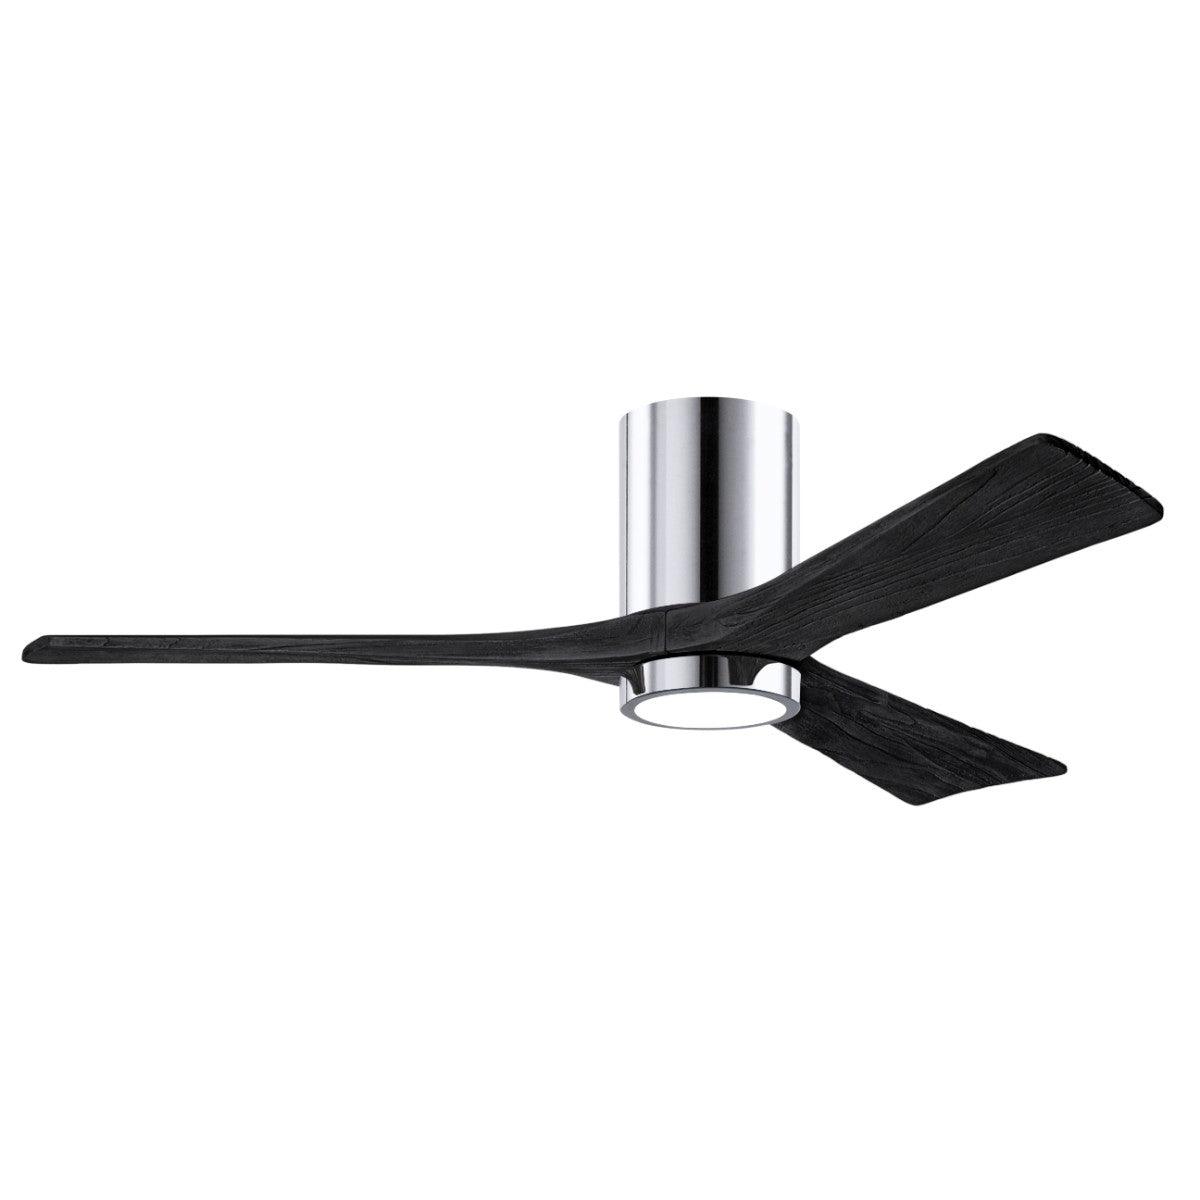 Irene 52 Inch Low Profile Outdoor Ceiling Fan With Light, Wall And Remote Control Included